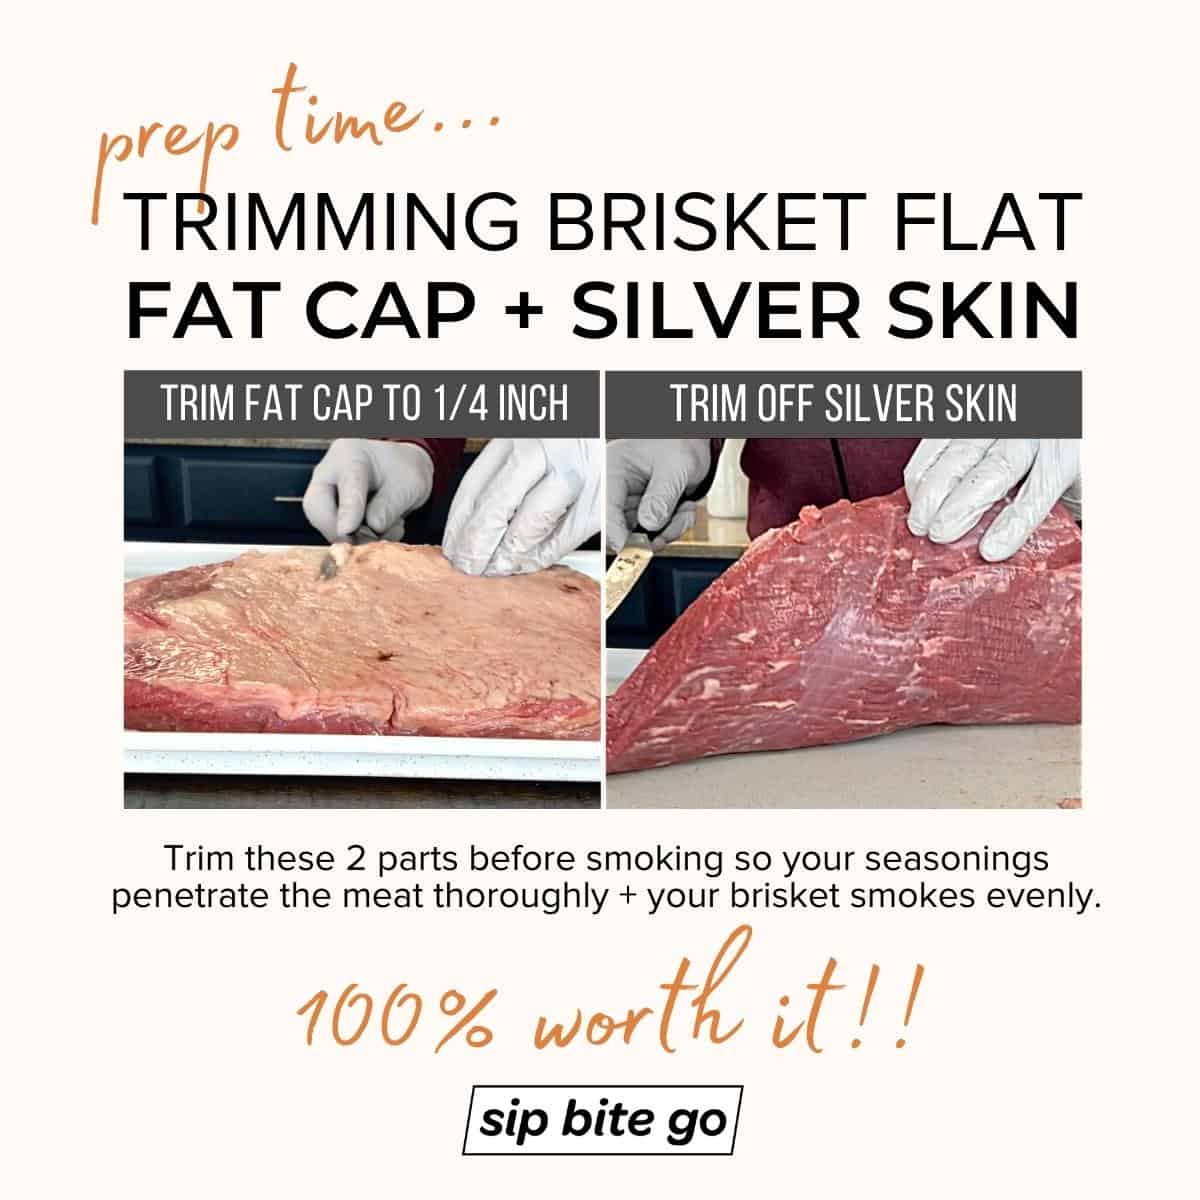 Infographic demonstrating trimming fat cap on brisket flat and cutting silver skin for smoking prep Sip Bite Go